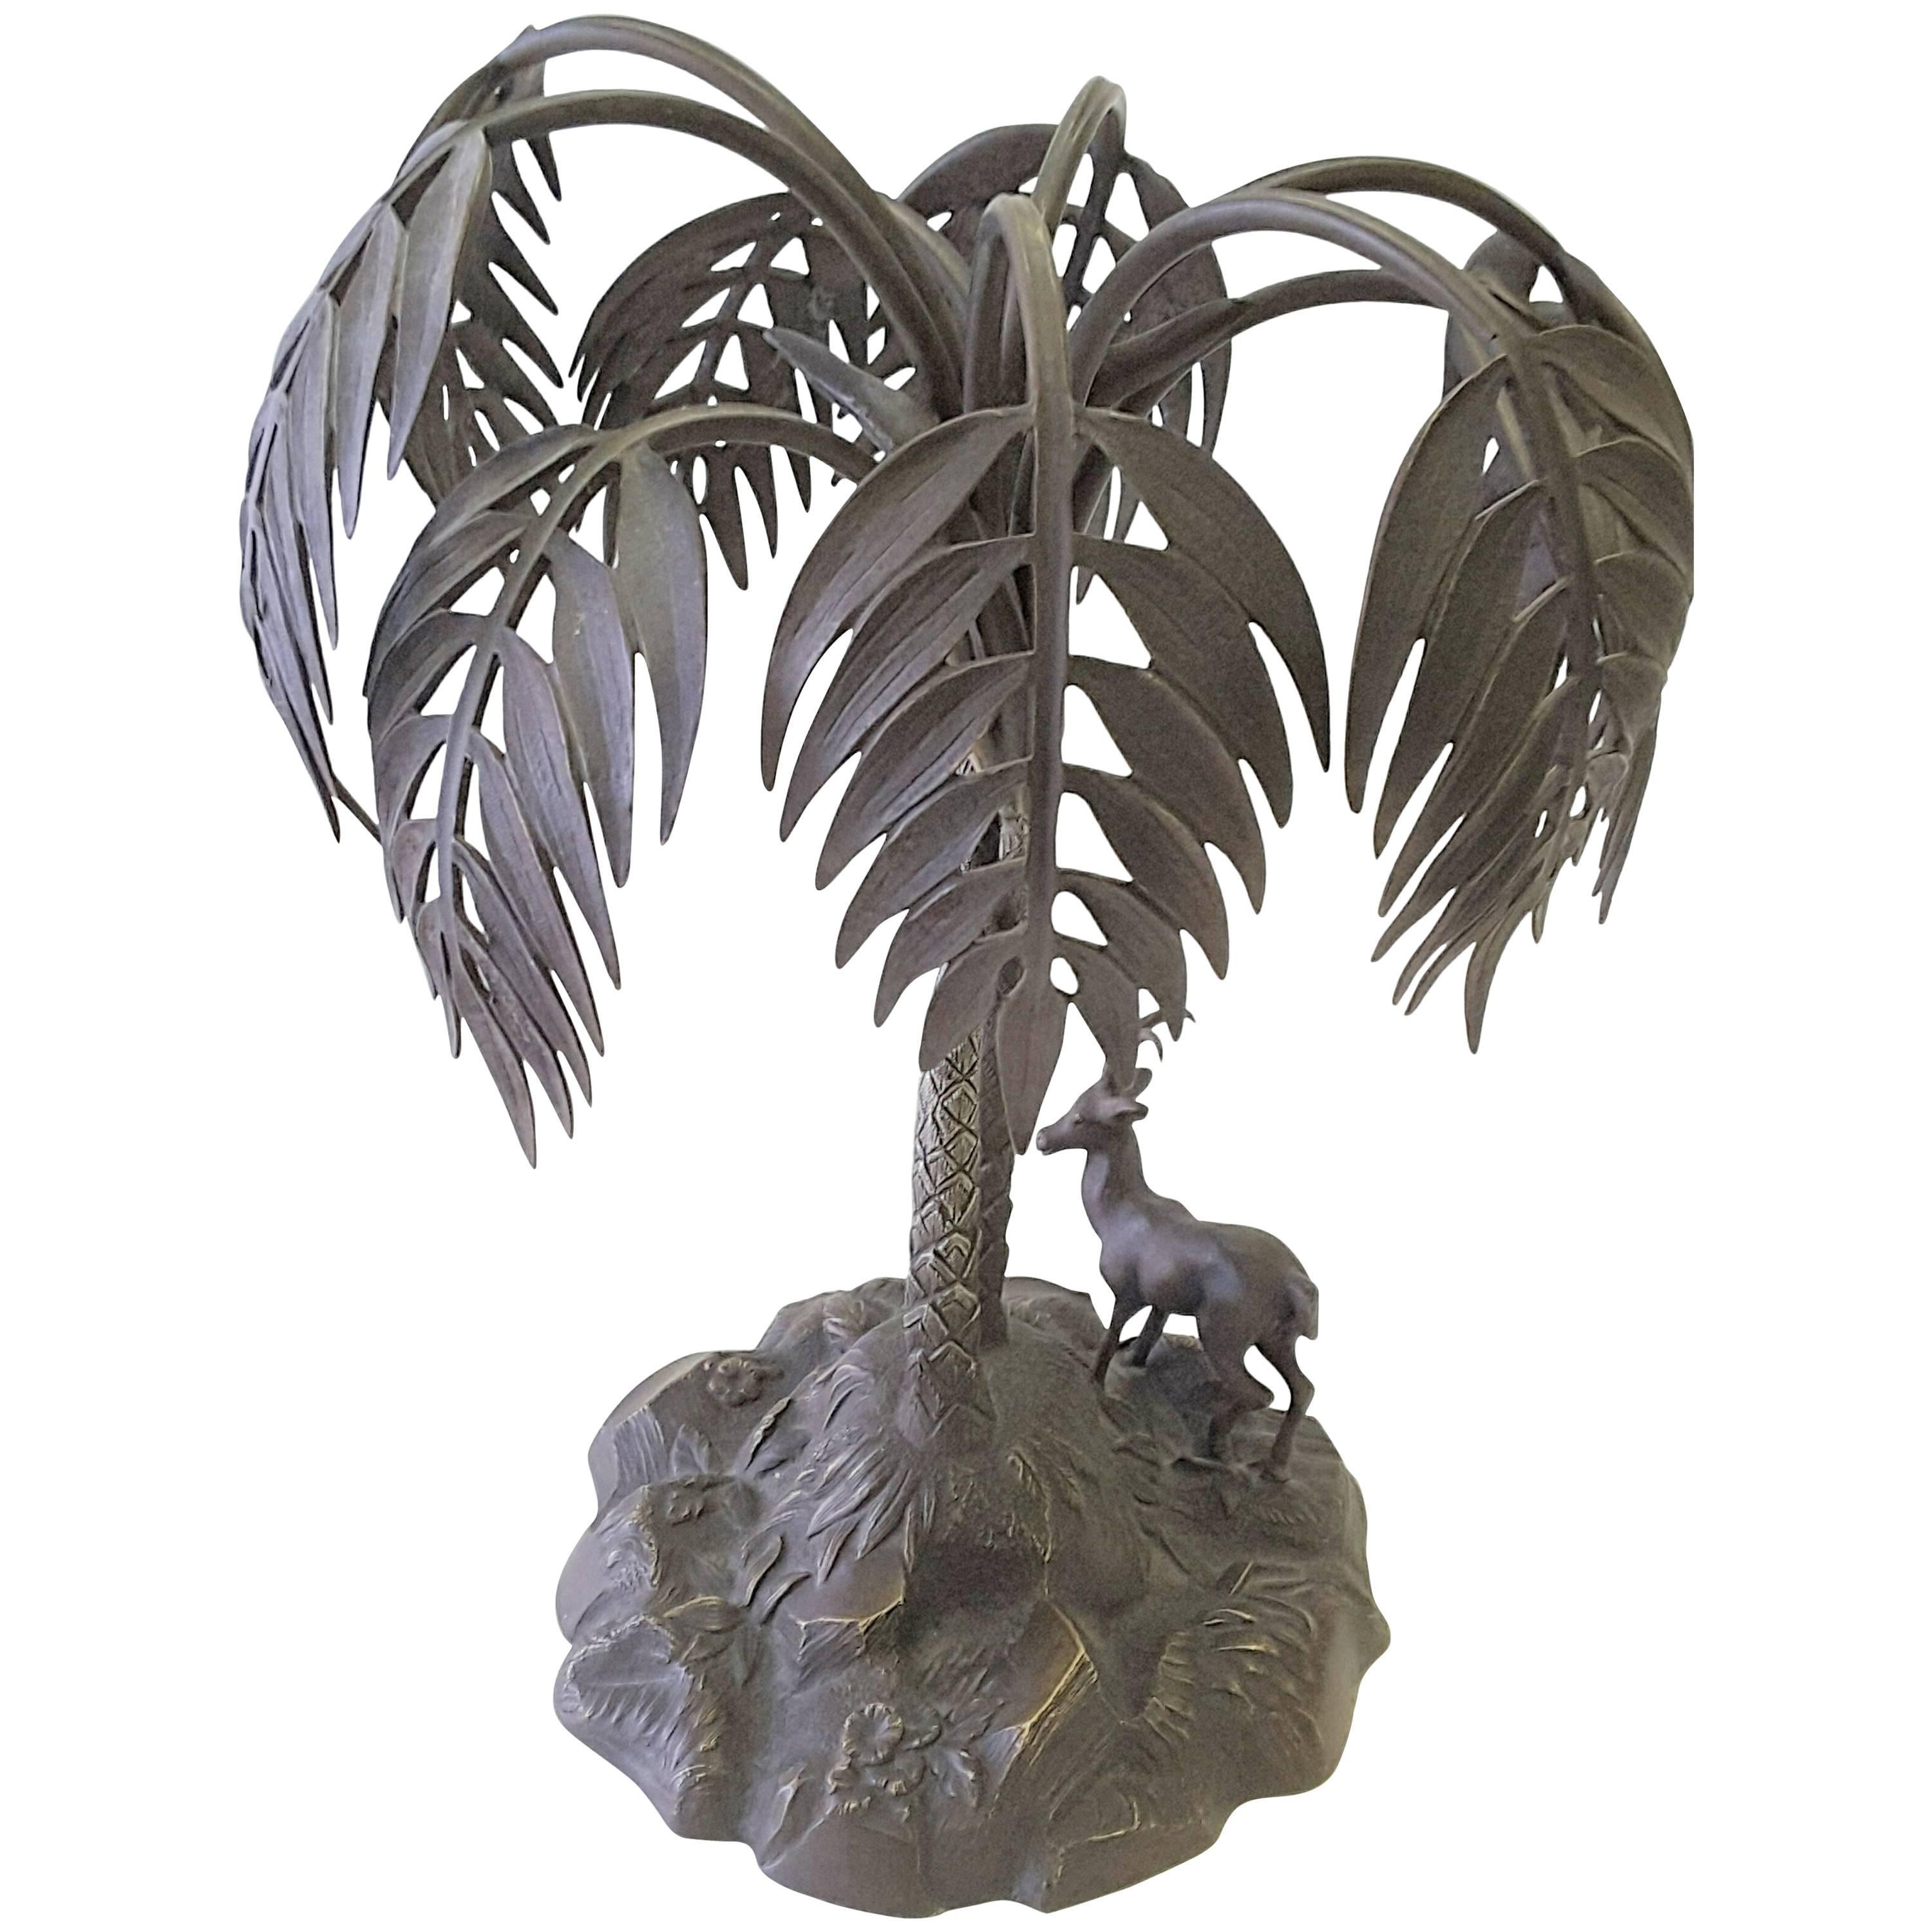 Bronzed Sculpture of a Palm Tree and Gazelle on a Rock Base